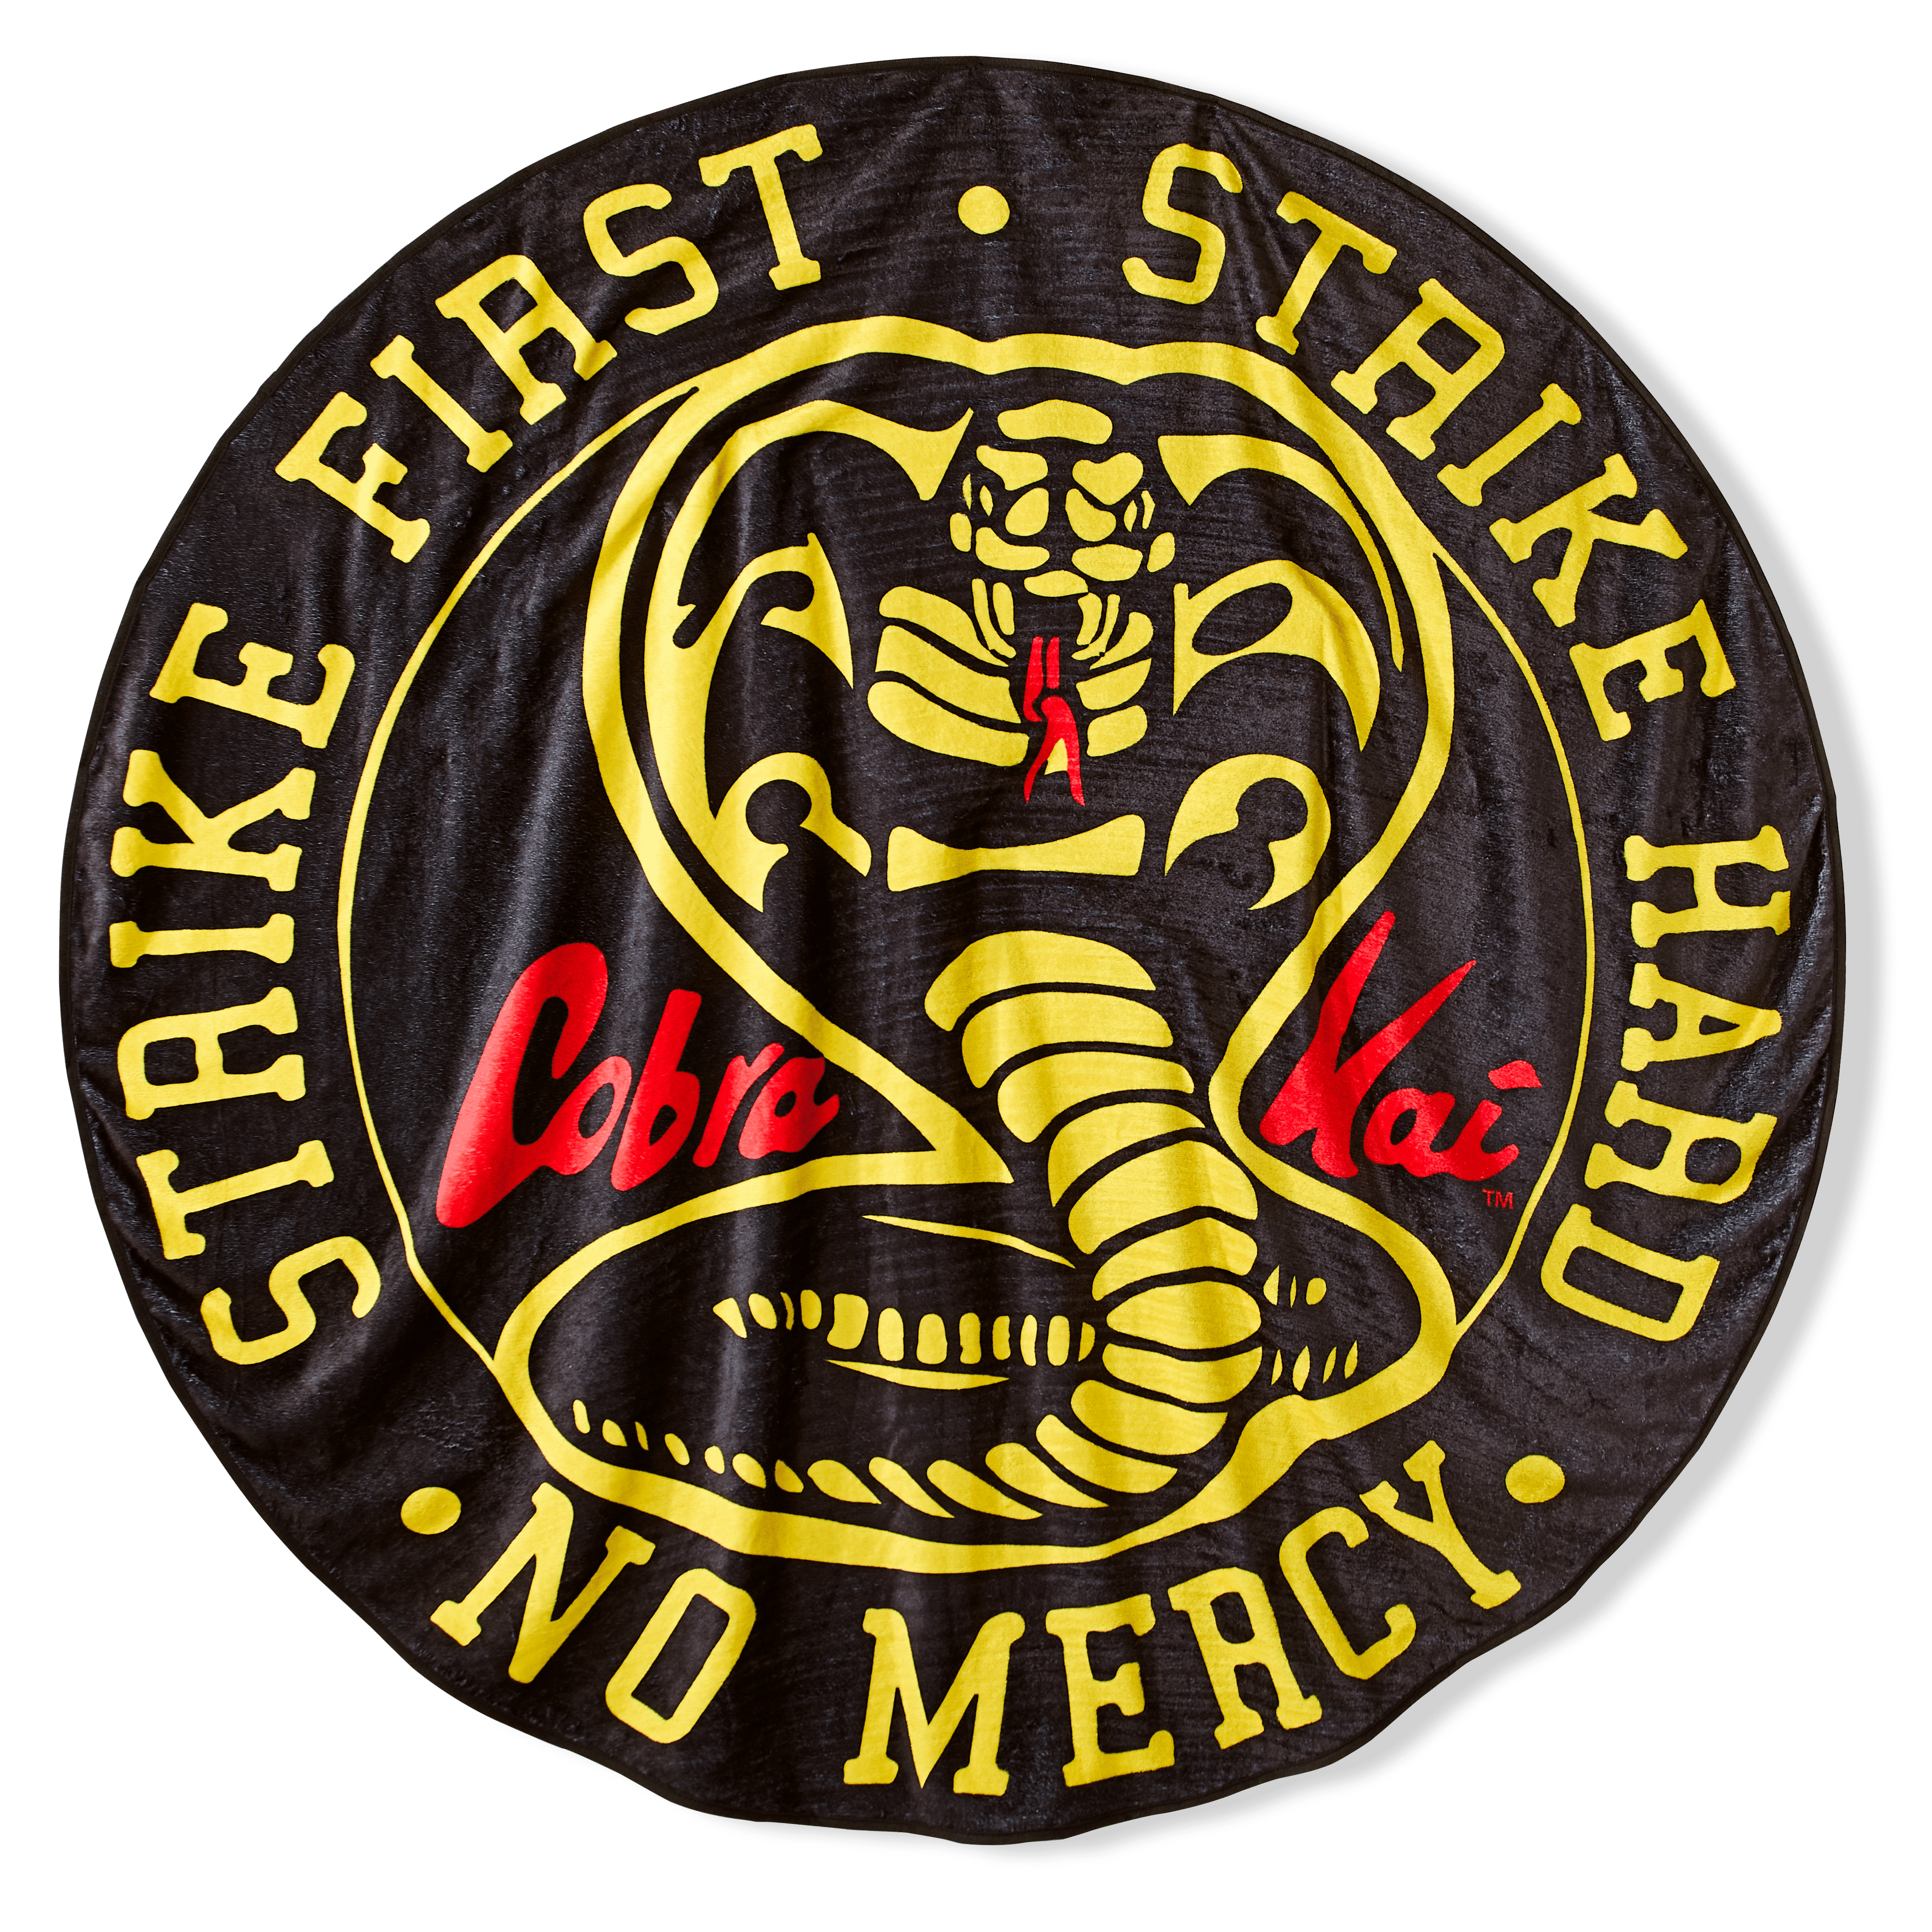 Cobra Kai sweeps the Loot Crate leg with new collection 18